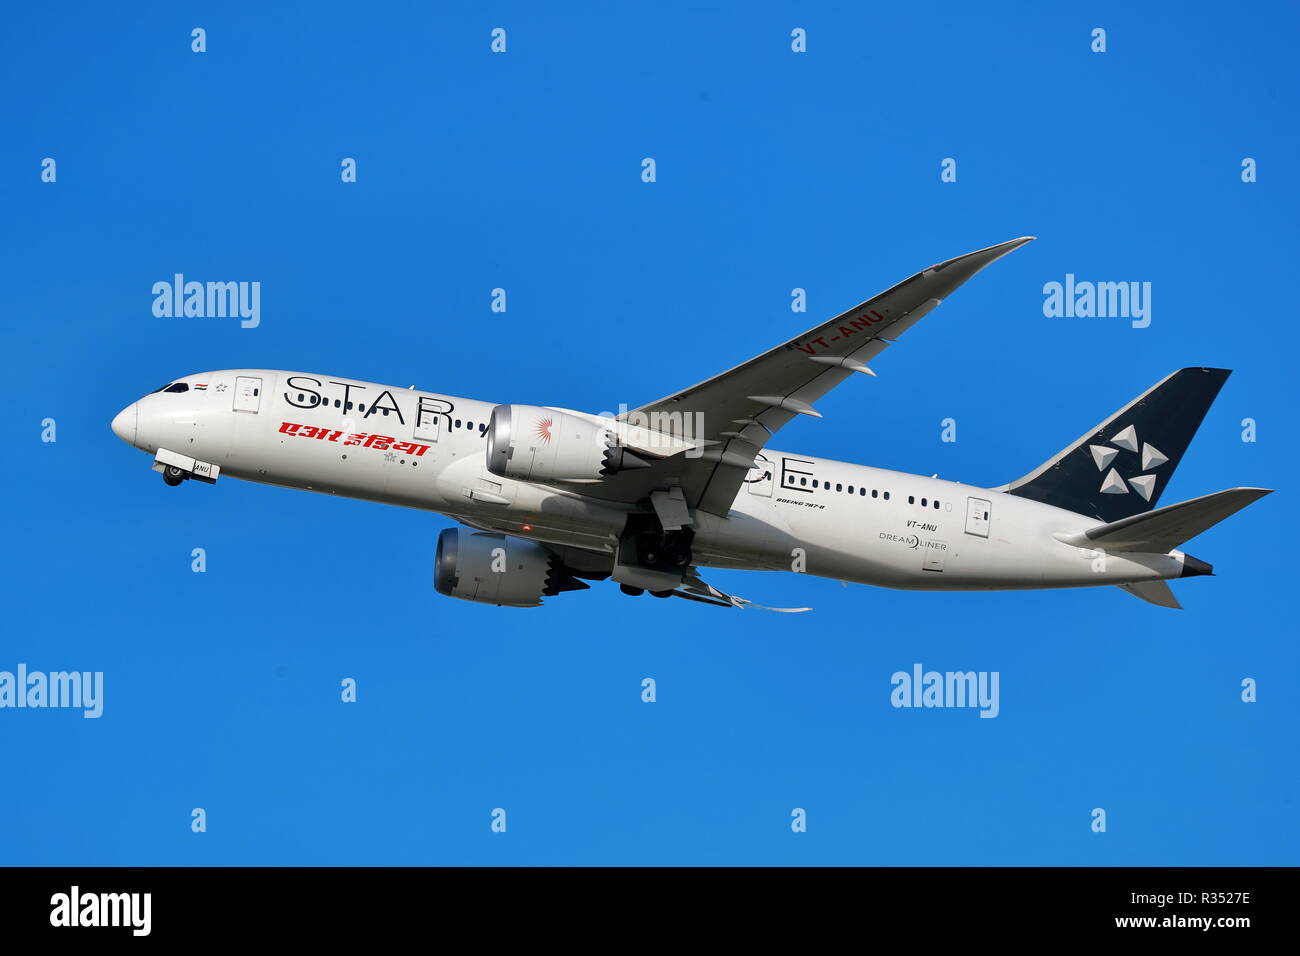 Air India Boeing 787-8 Dreamliner VT-ANU Star Alliance takes off at London Heathrow Airport, UK Stock Photo